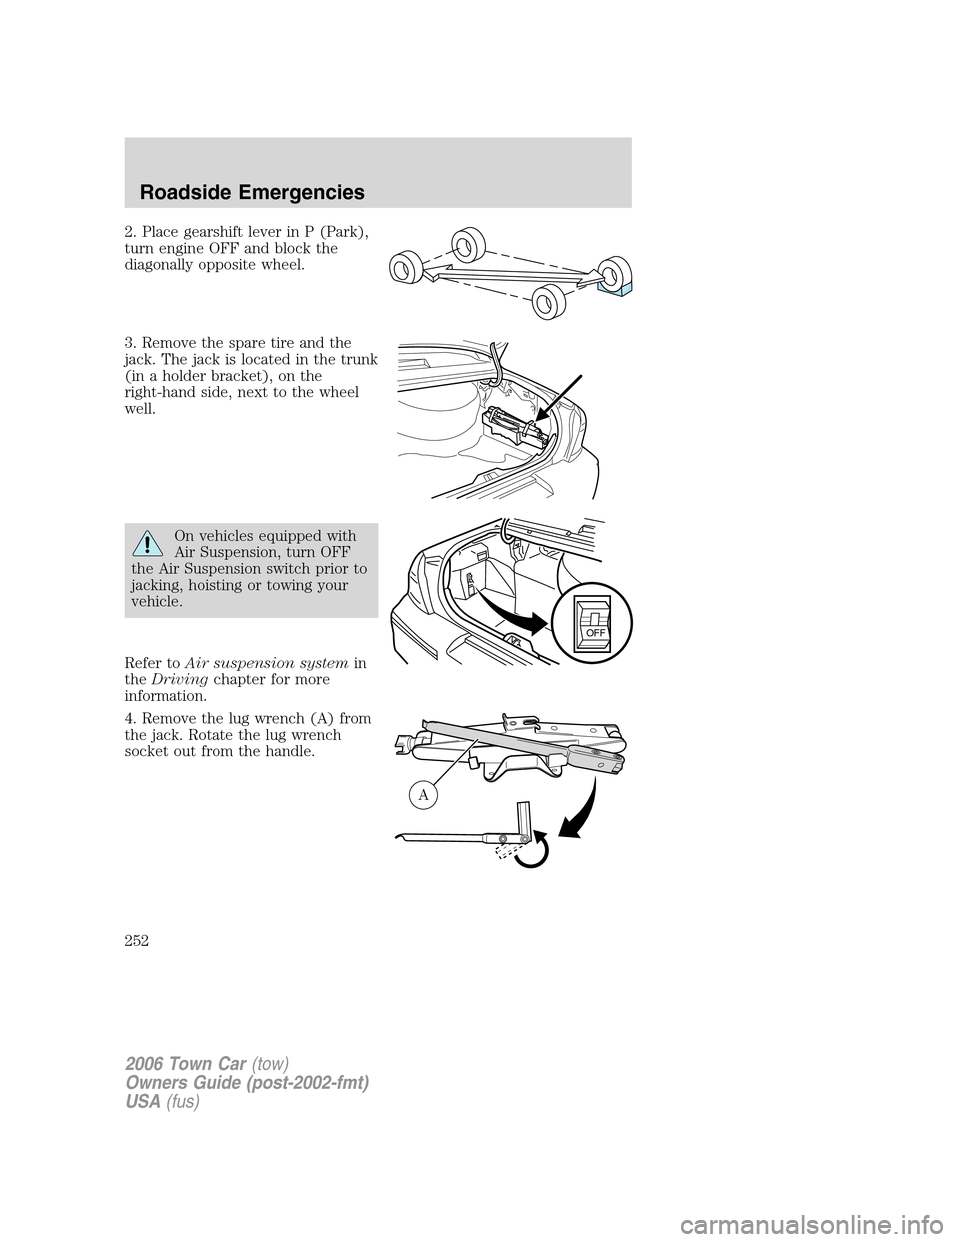 LINCOLN TOWN CAR 2006 Owners Guide 2. Place gearshift lever in P (Park),
turn engine OFF and block the
diagonally opposite wheel.
3. Remove the spare tire and the
jack. The jack is located in the trunk
(in a holder bracket), on the
rig